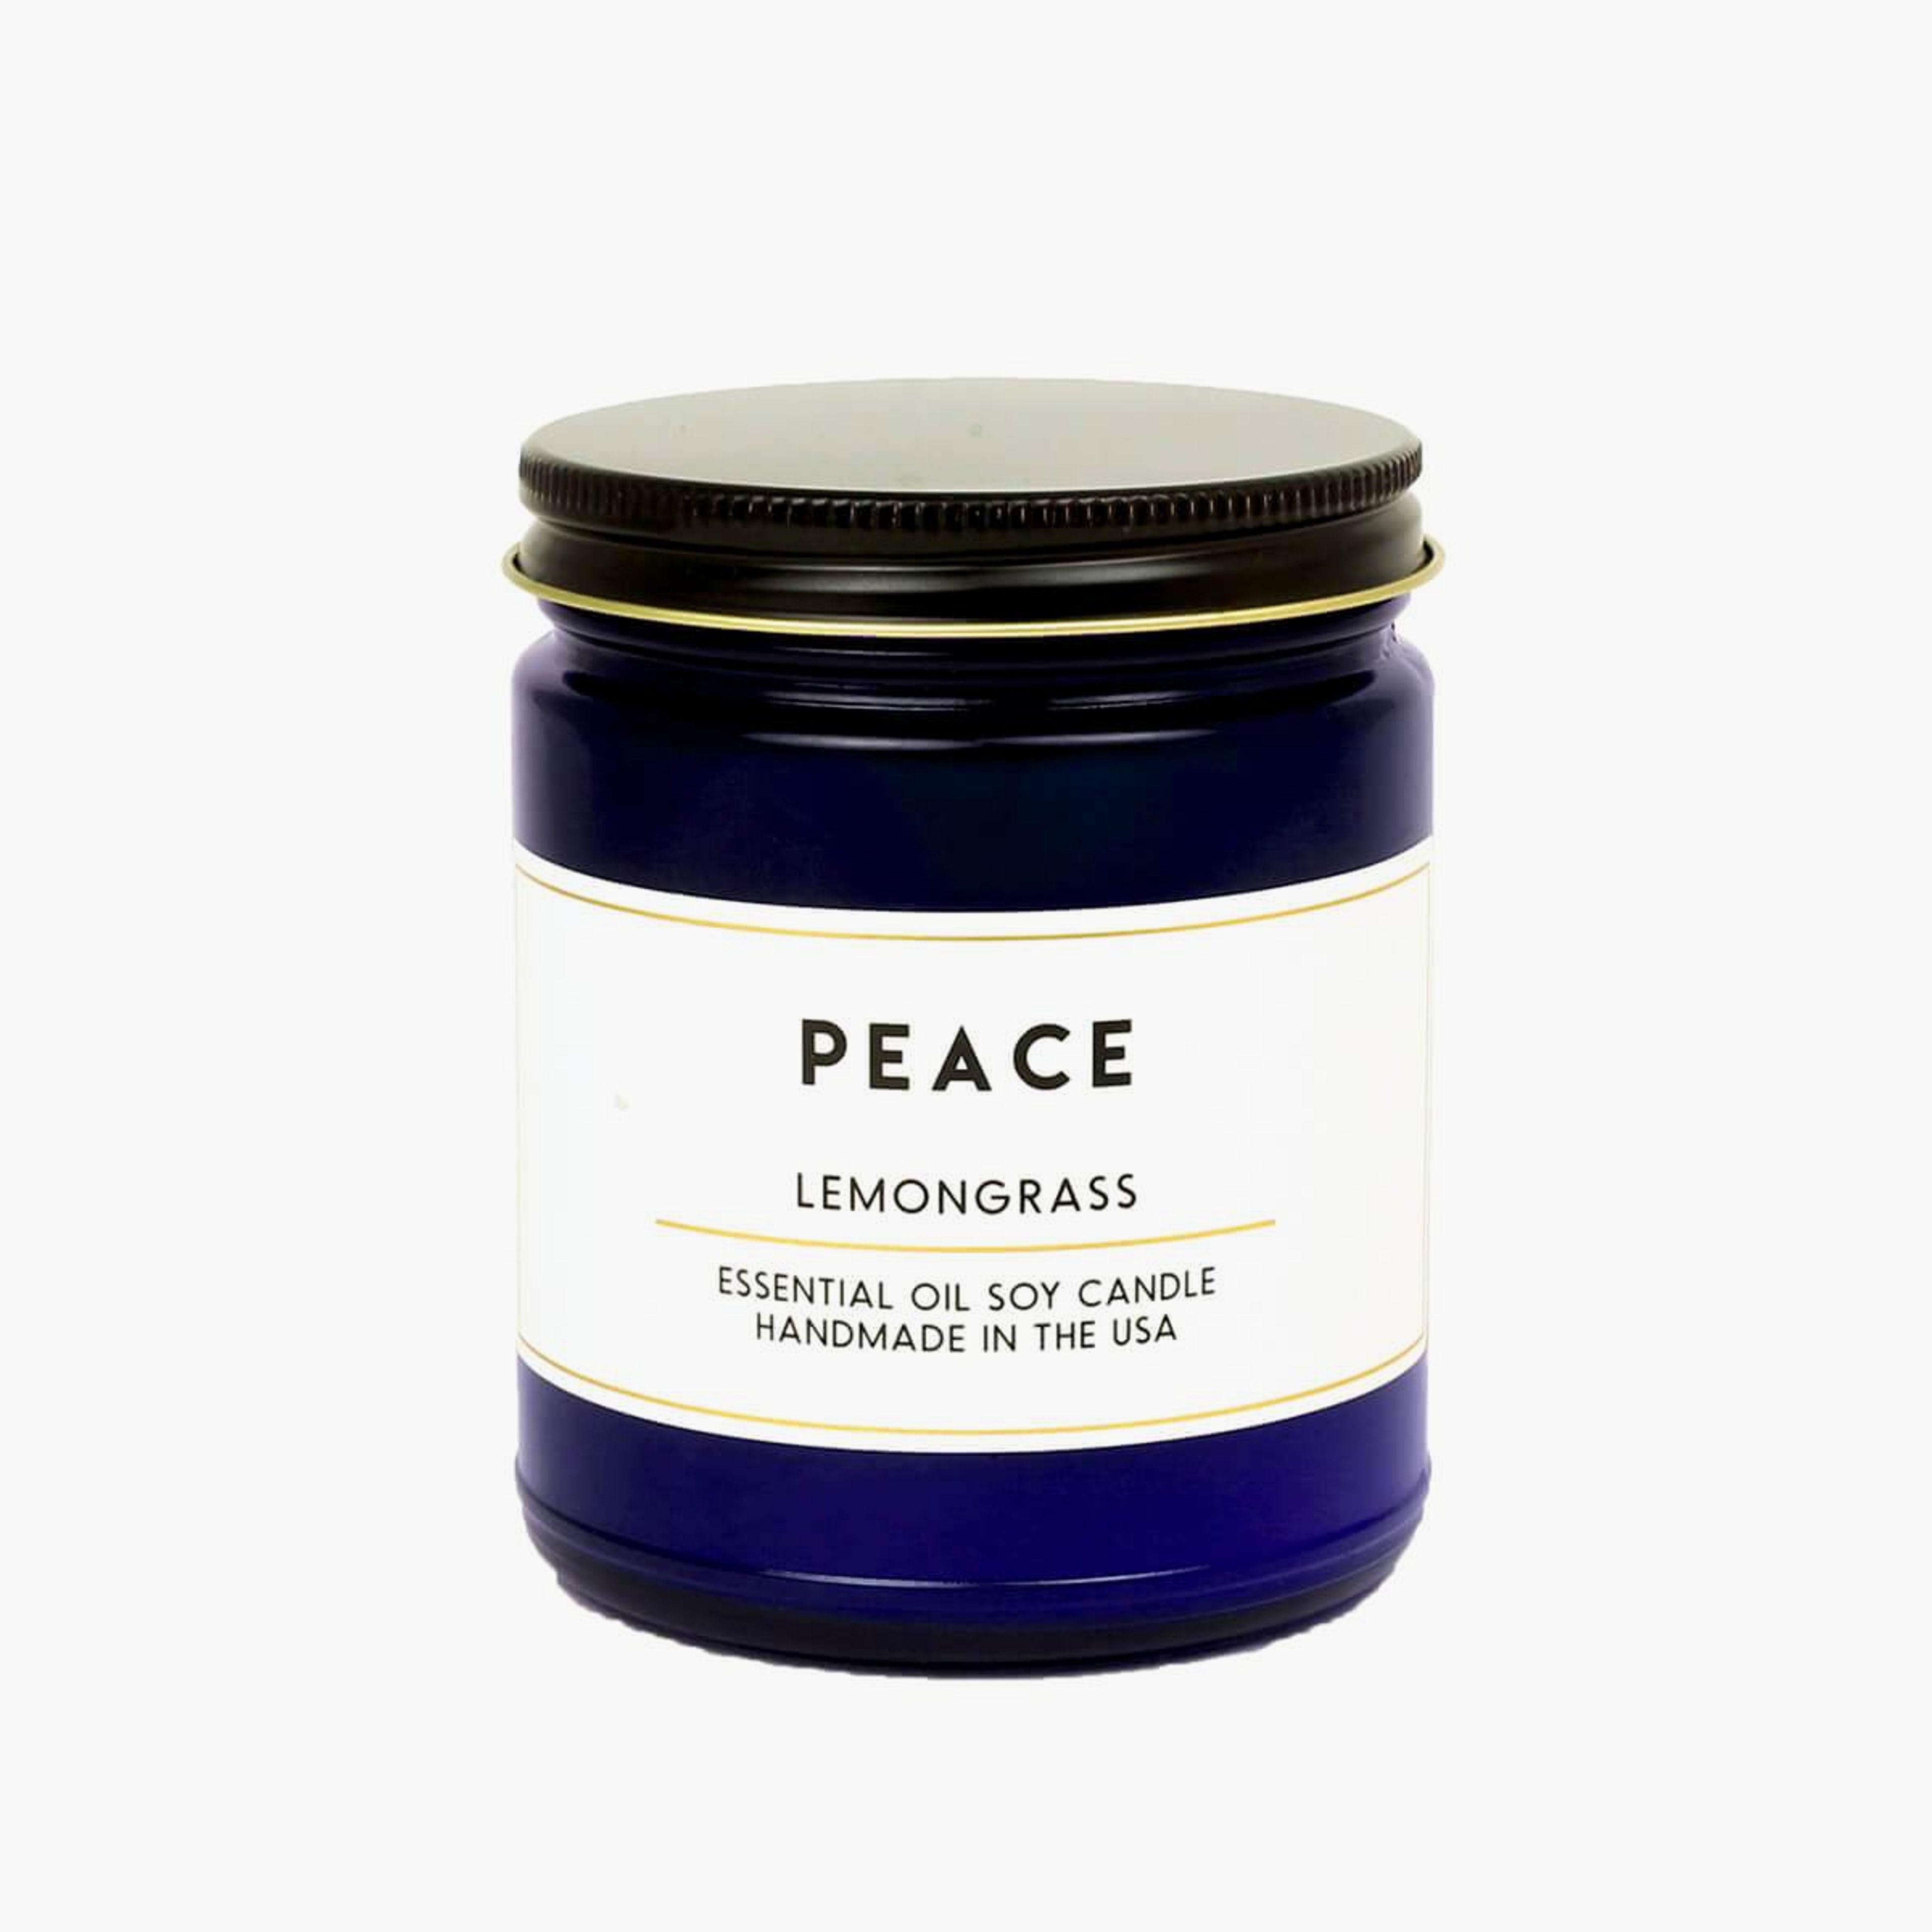 Peace Lemongrass Essential Oil Aromatherapy Candle